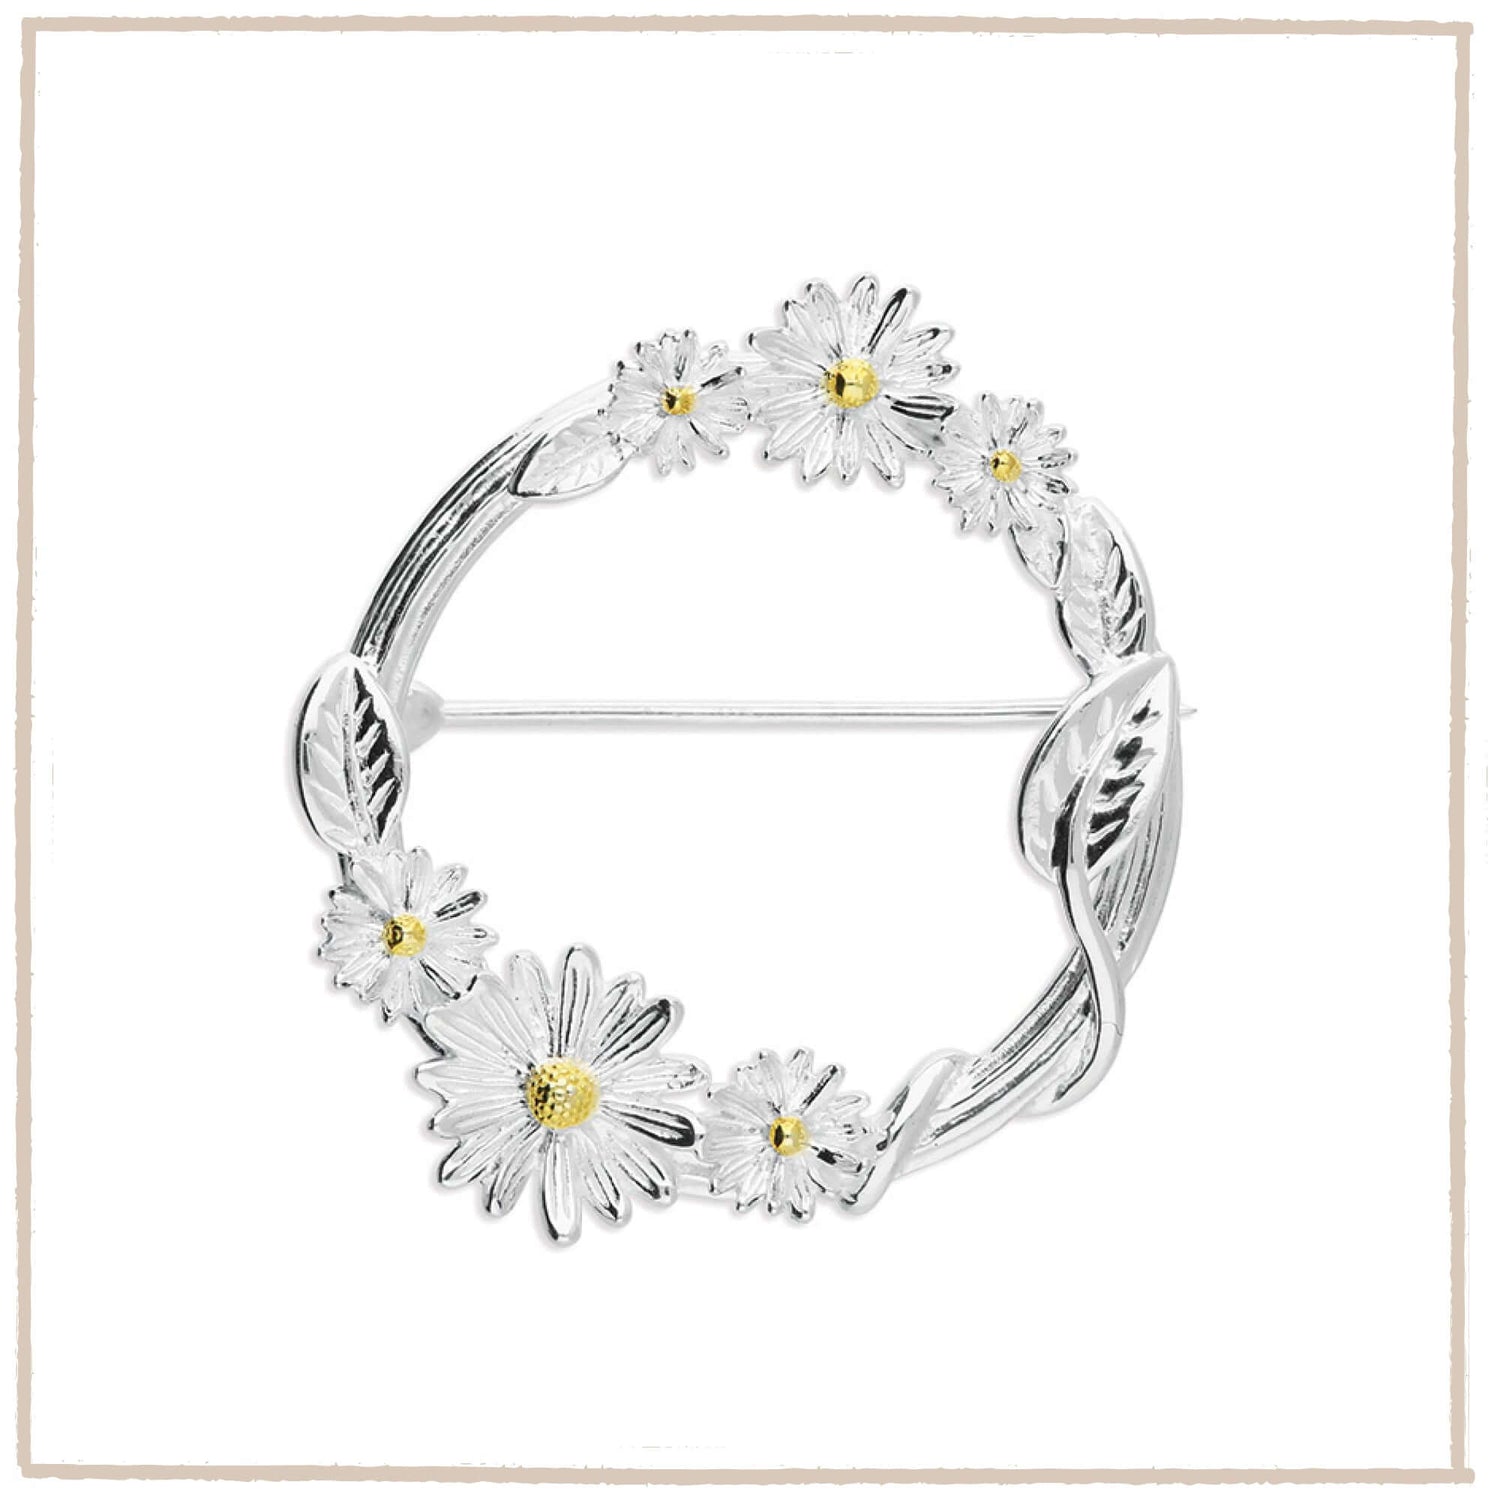 The Daisy Collection